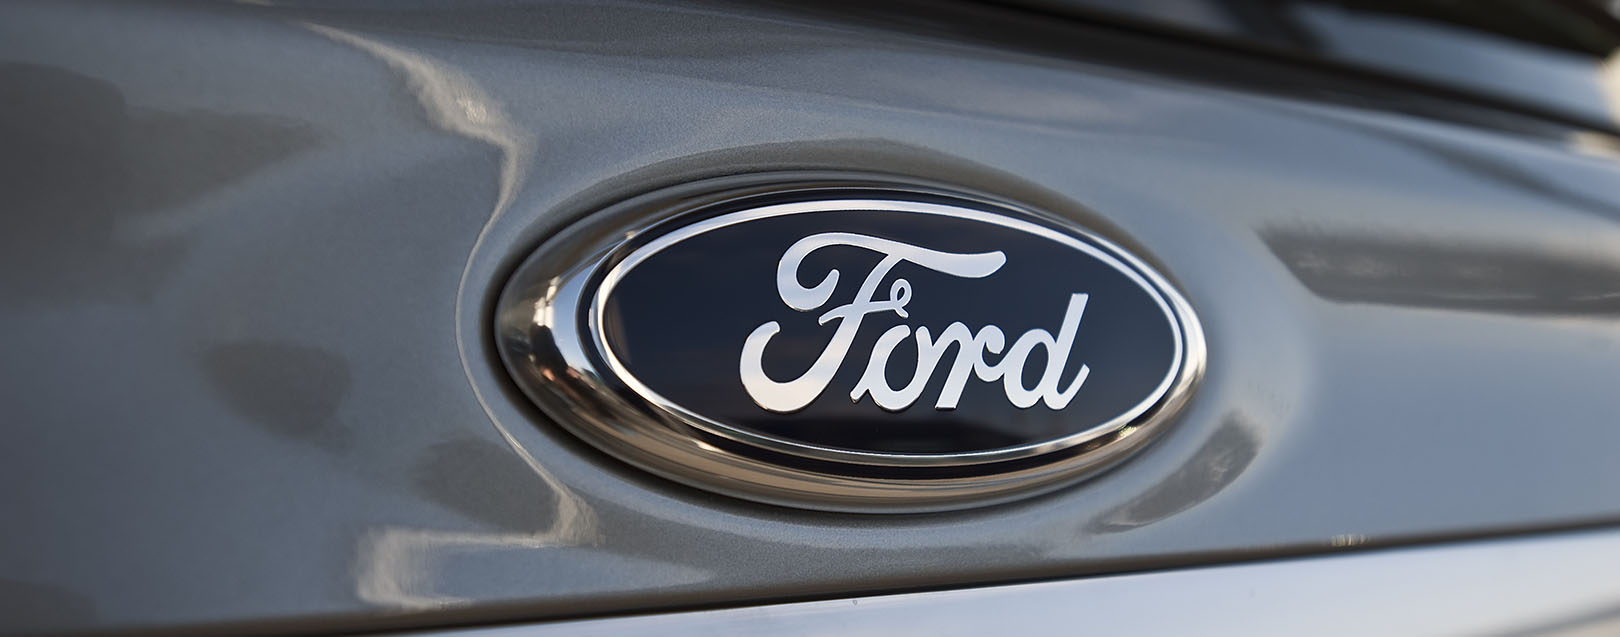 Ford set to lose $600 million following Brexit currency hit